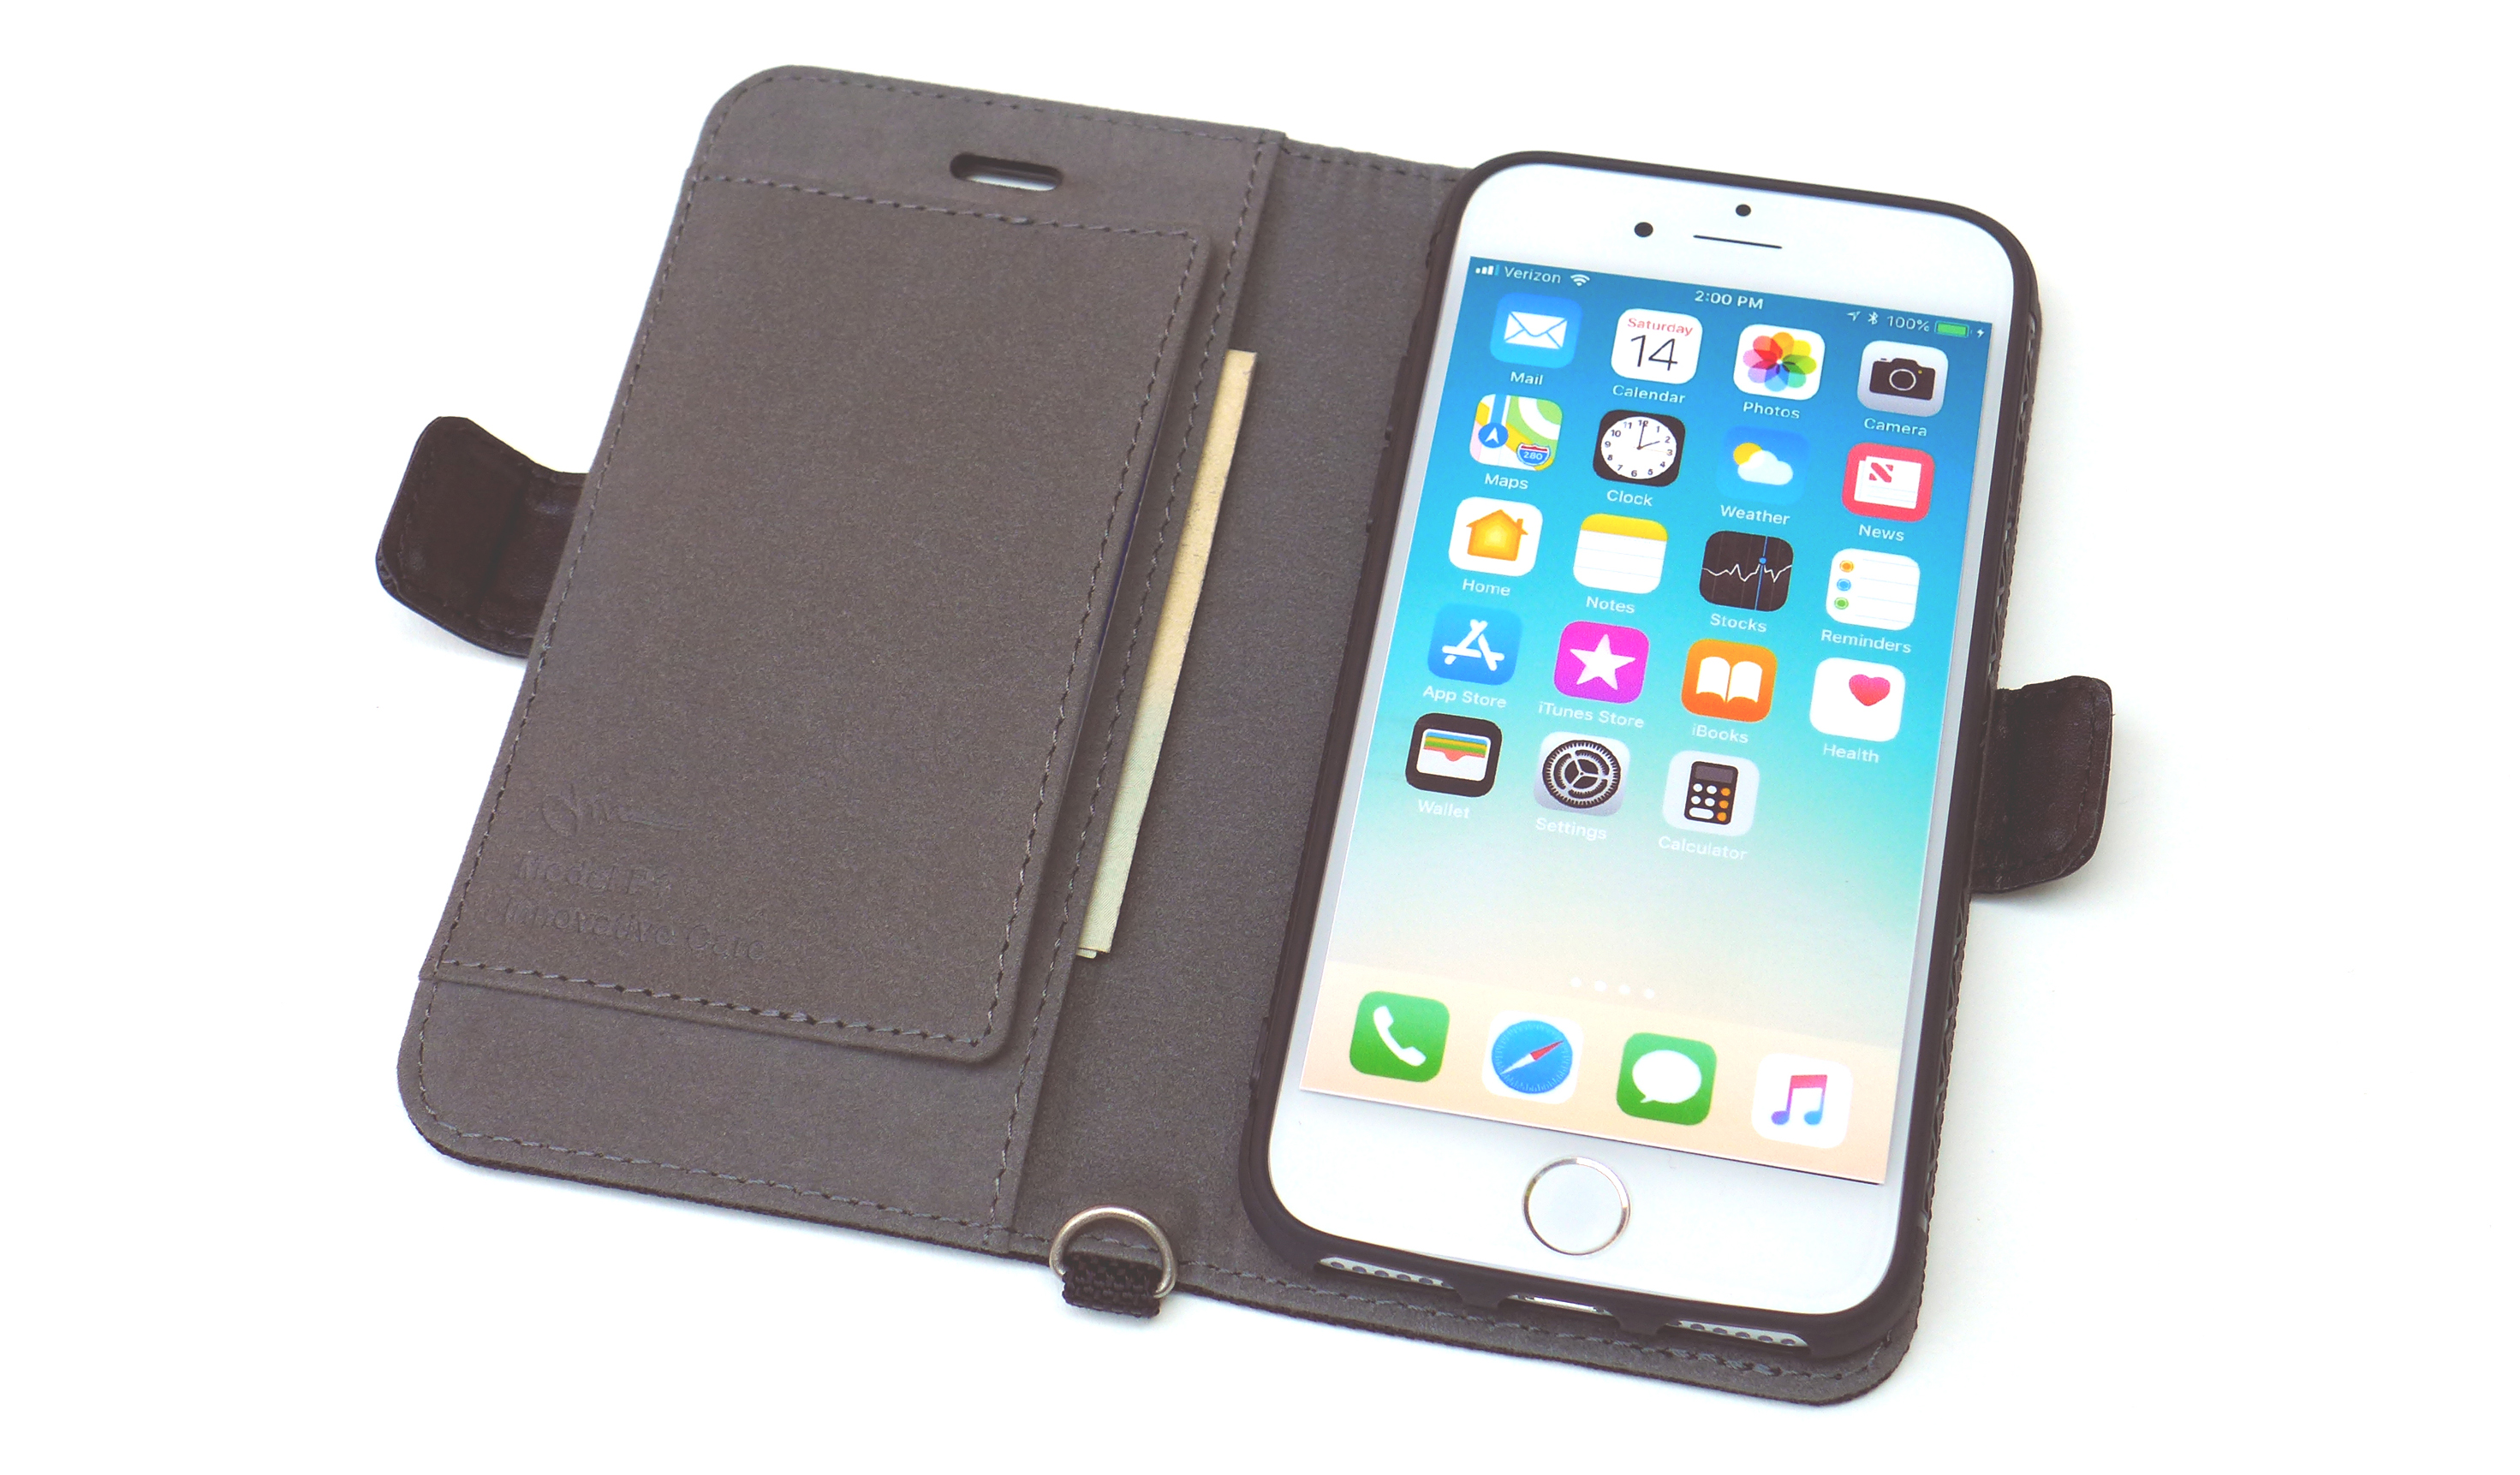 Wallet Case for iPhone 8, 7, 6s and 6 -Holds Apple Card, Credit Cards, I.D. -Model P1